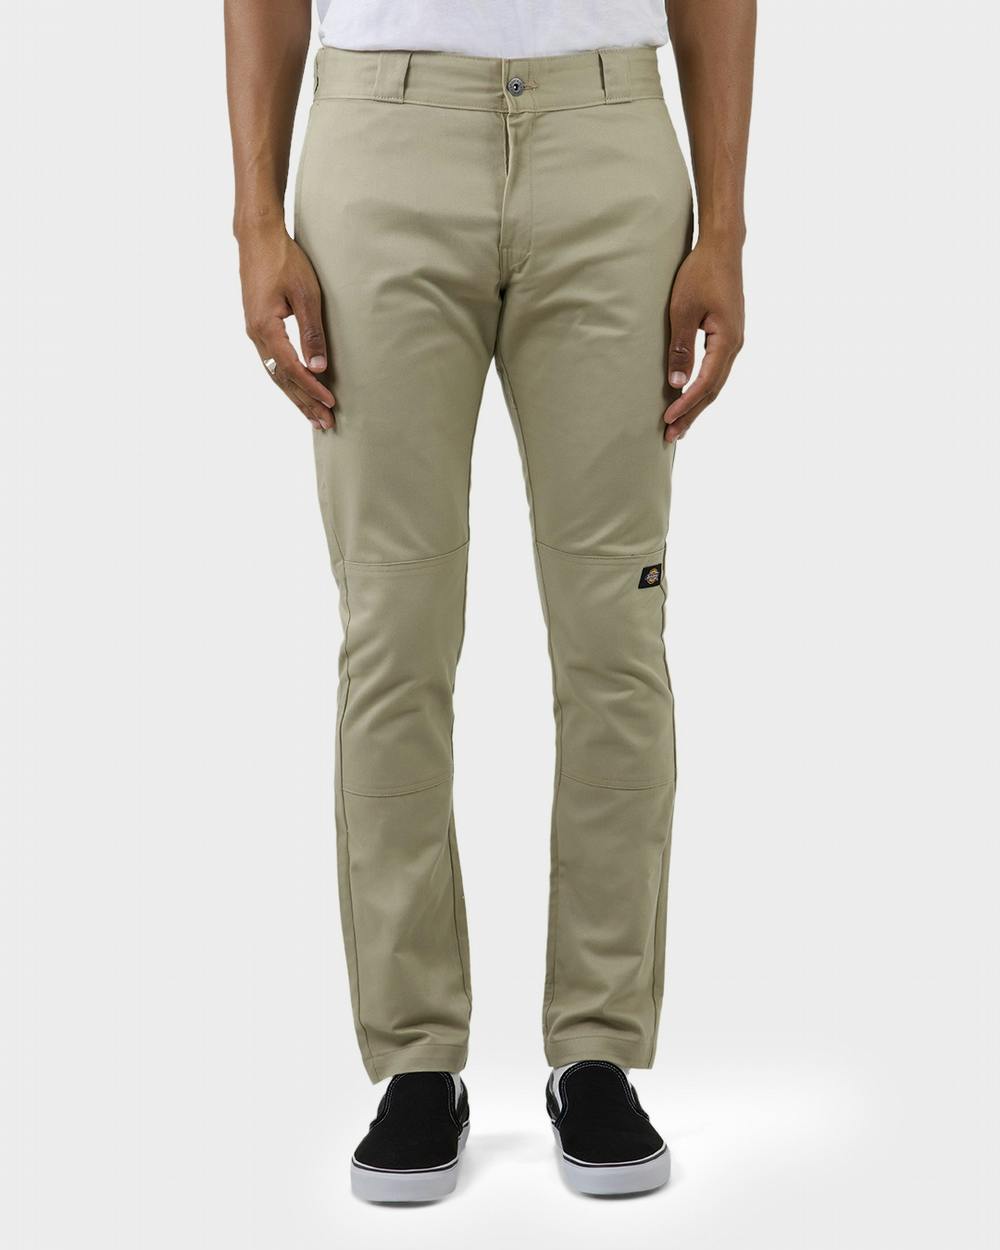 811 Skinny Straight Fit Double knee Work Pant